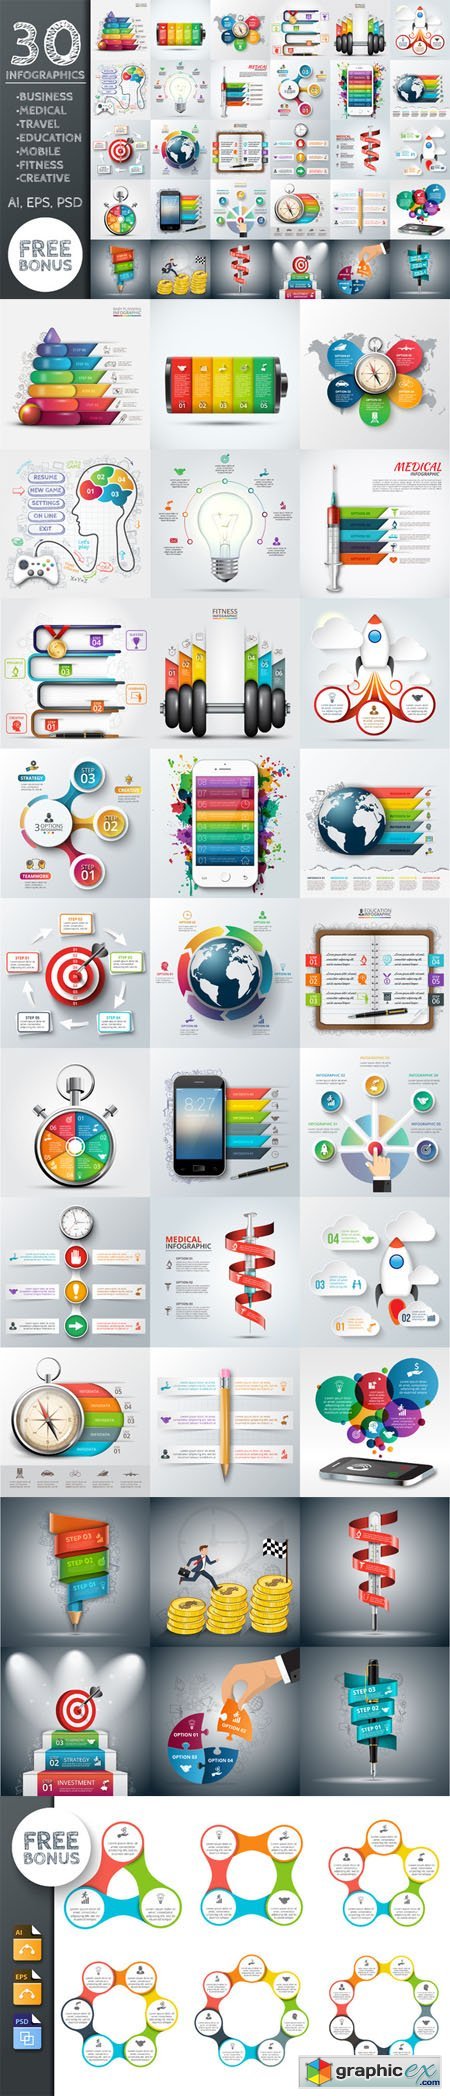 30 business infographic templates